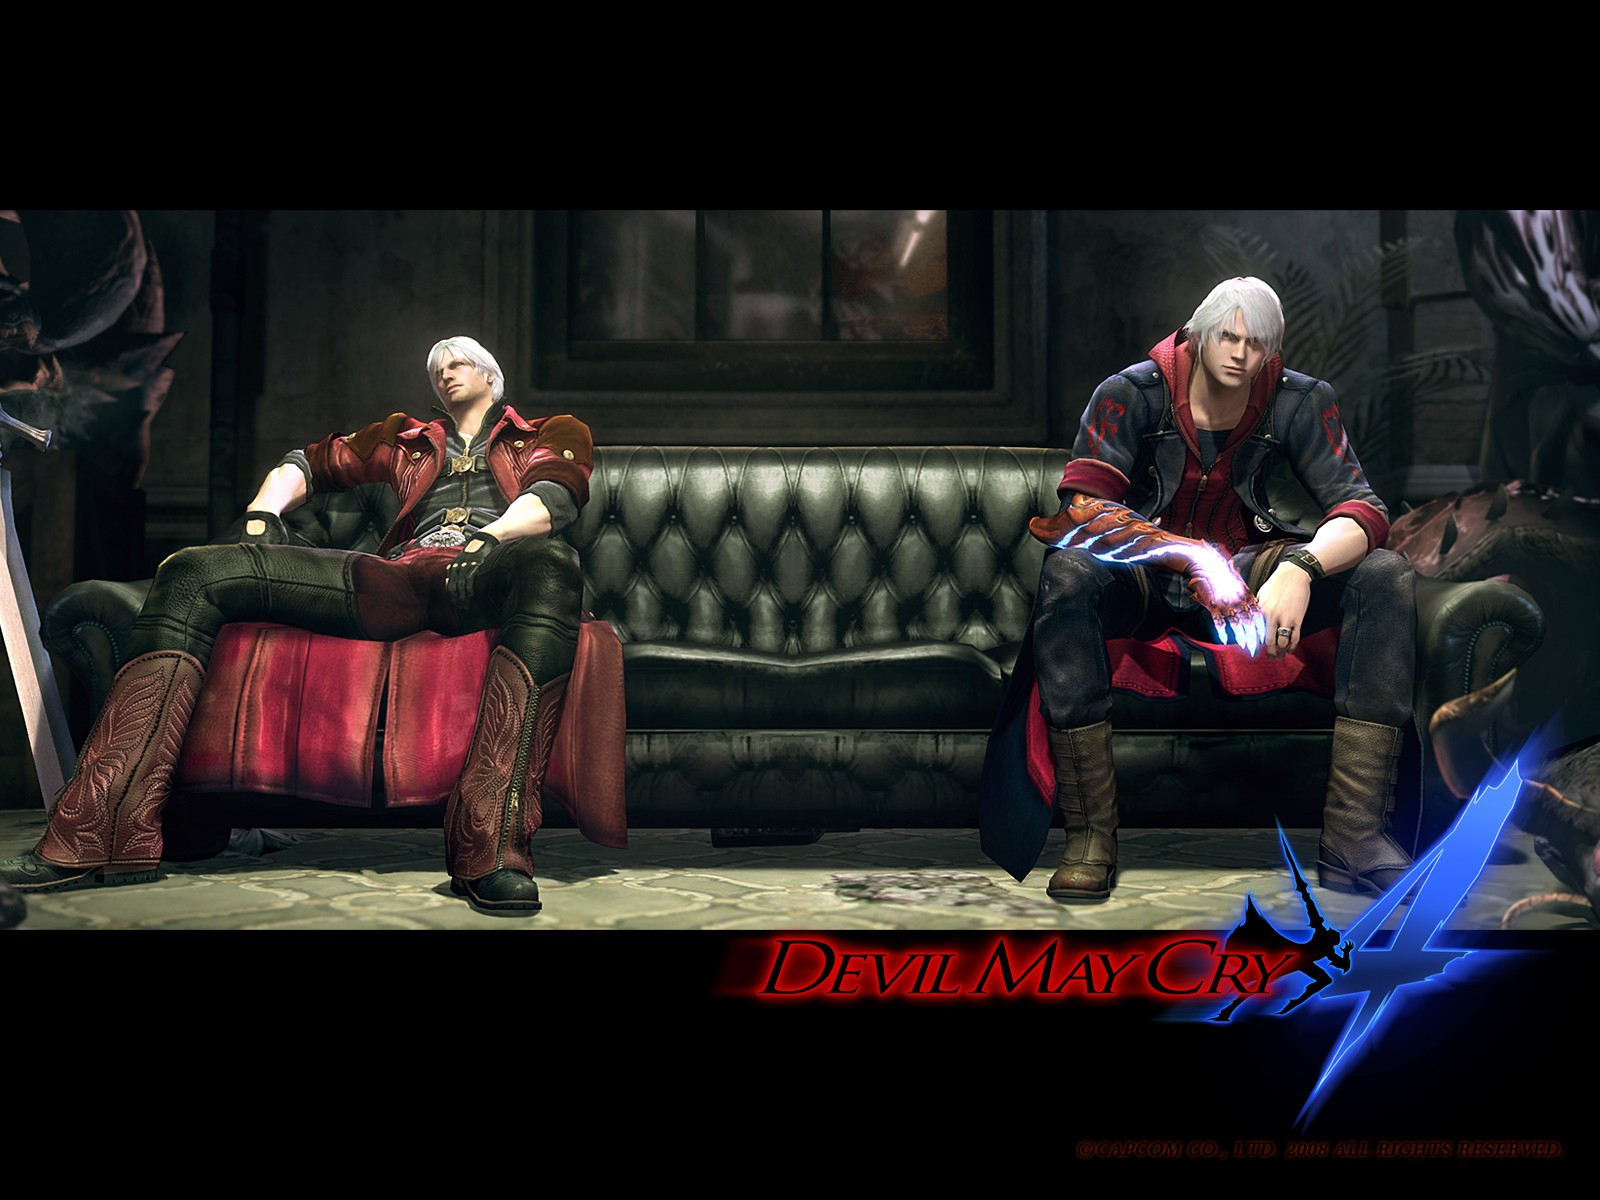 Jogo Pc Devil May Cry Reloaded Feh The Anony Bay O